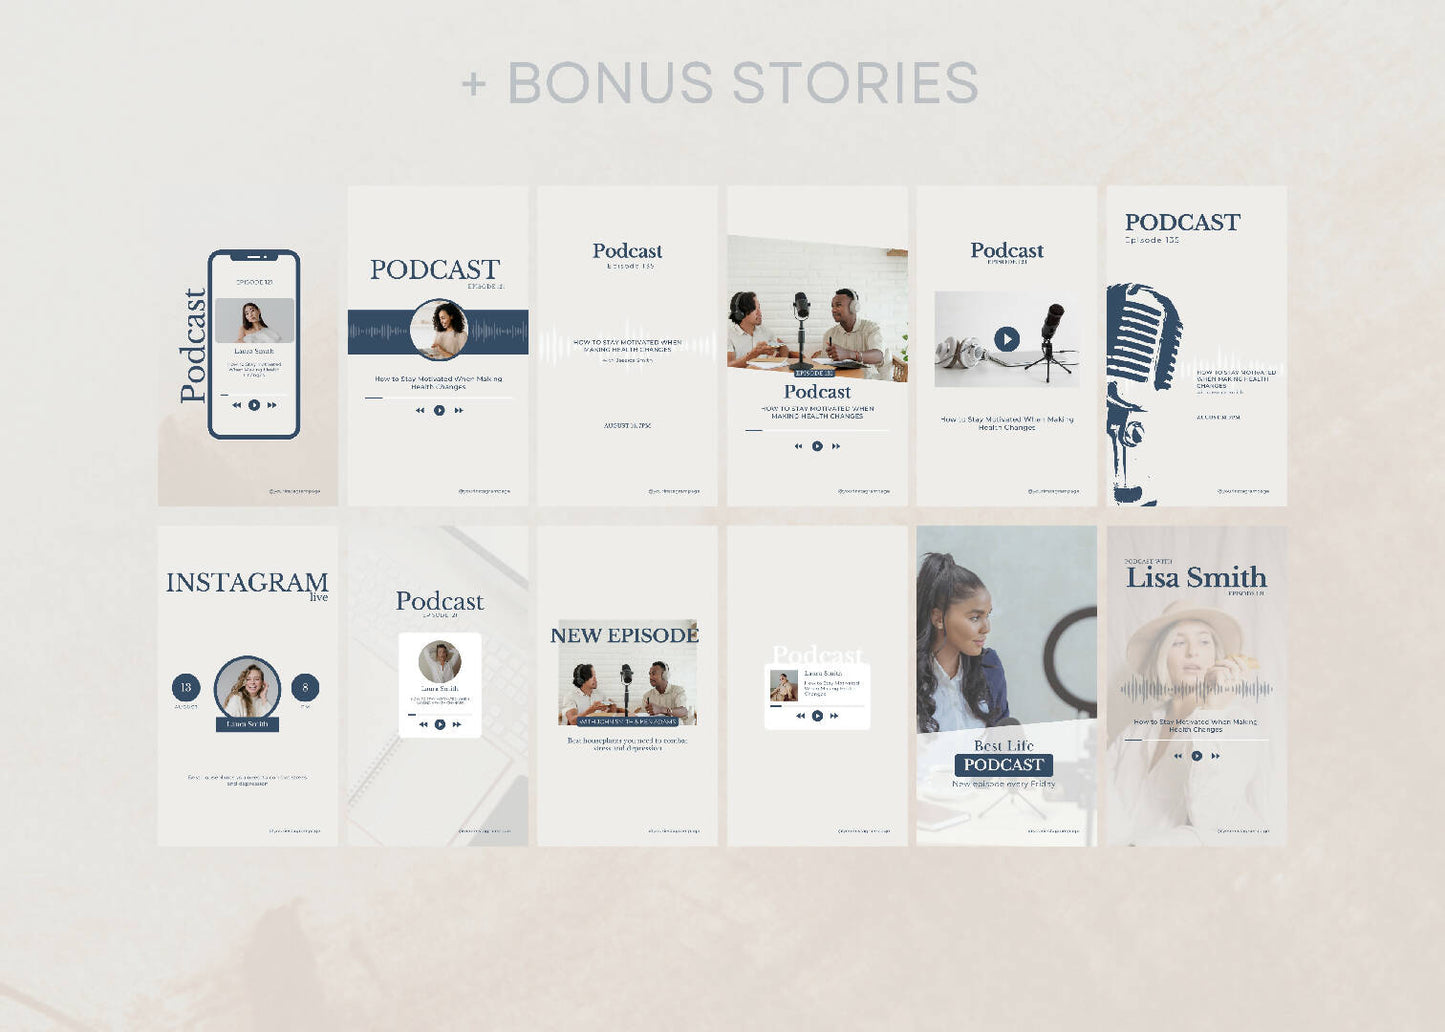 48 Instagram Multipurpose Canva Template Bundle For Podcast & Webinars. Best for Coaching, Fashion and Wellness.